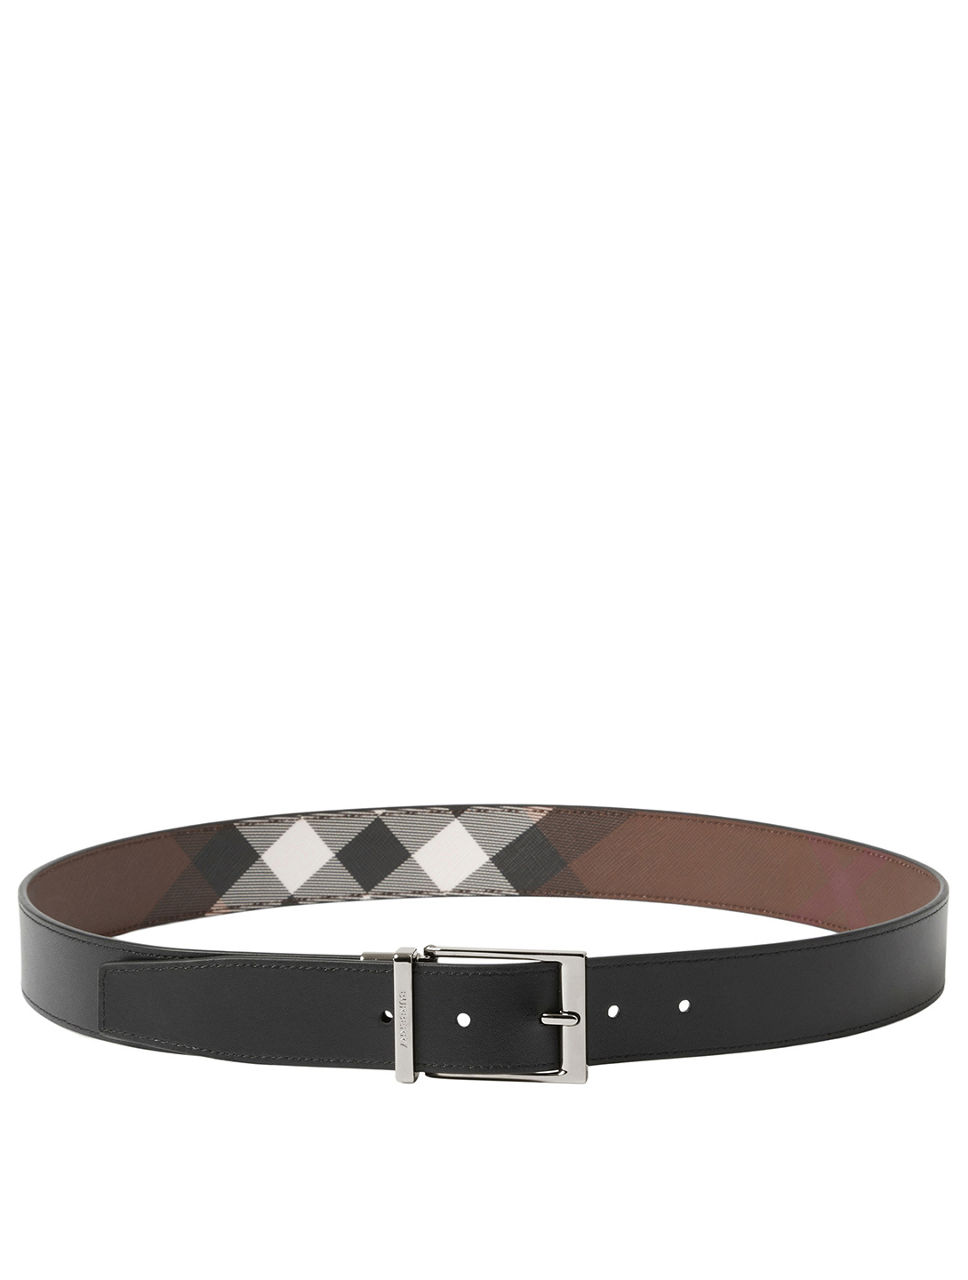 BURBERRY Check And Leather Reversible Belt